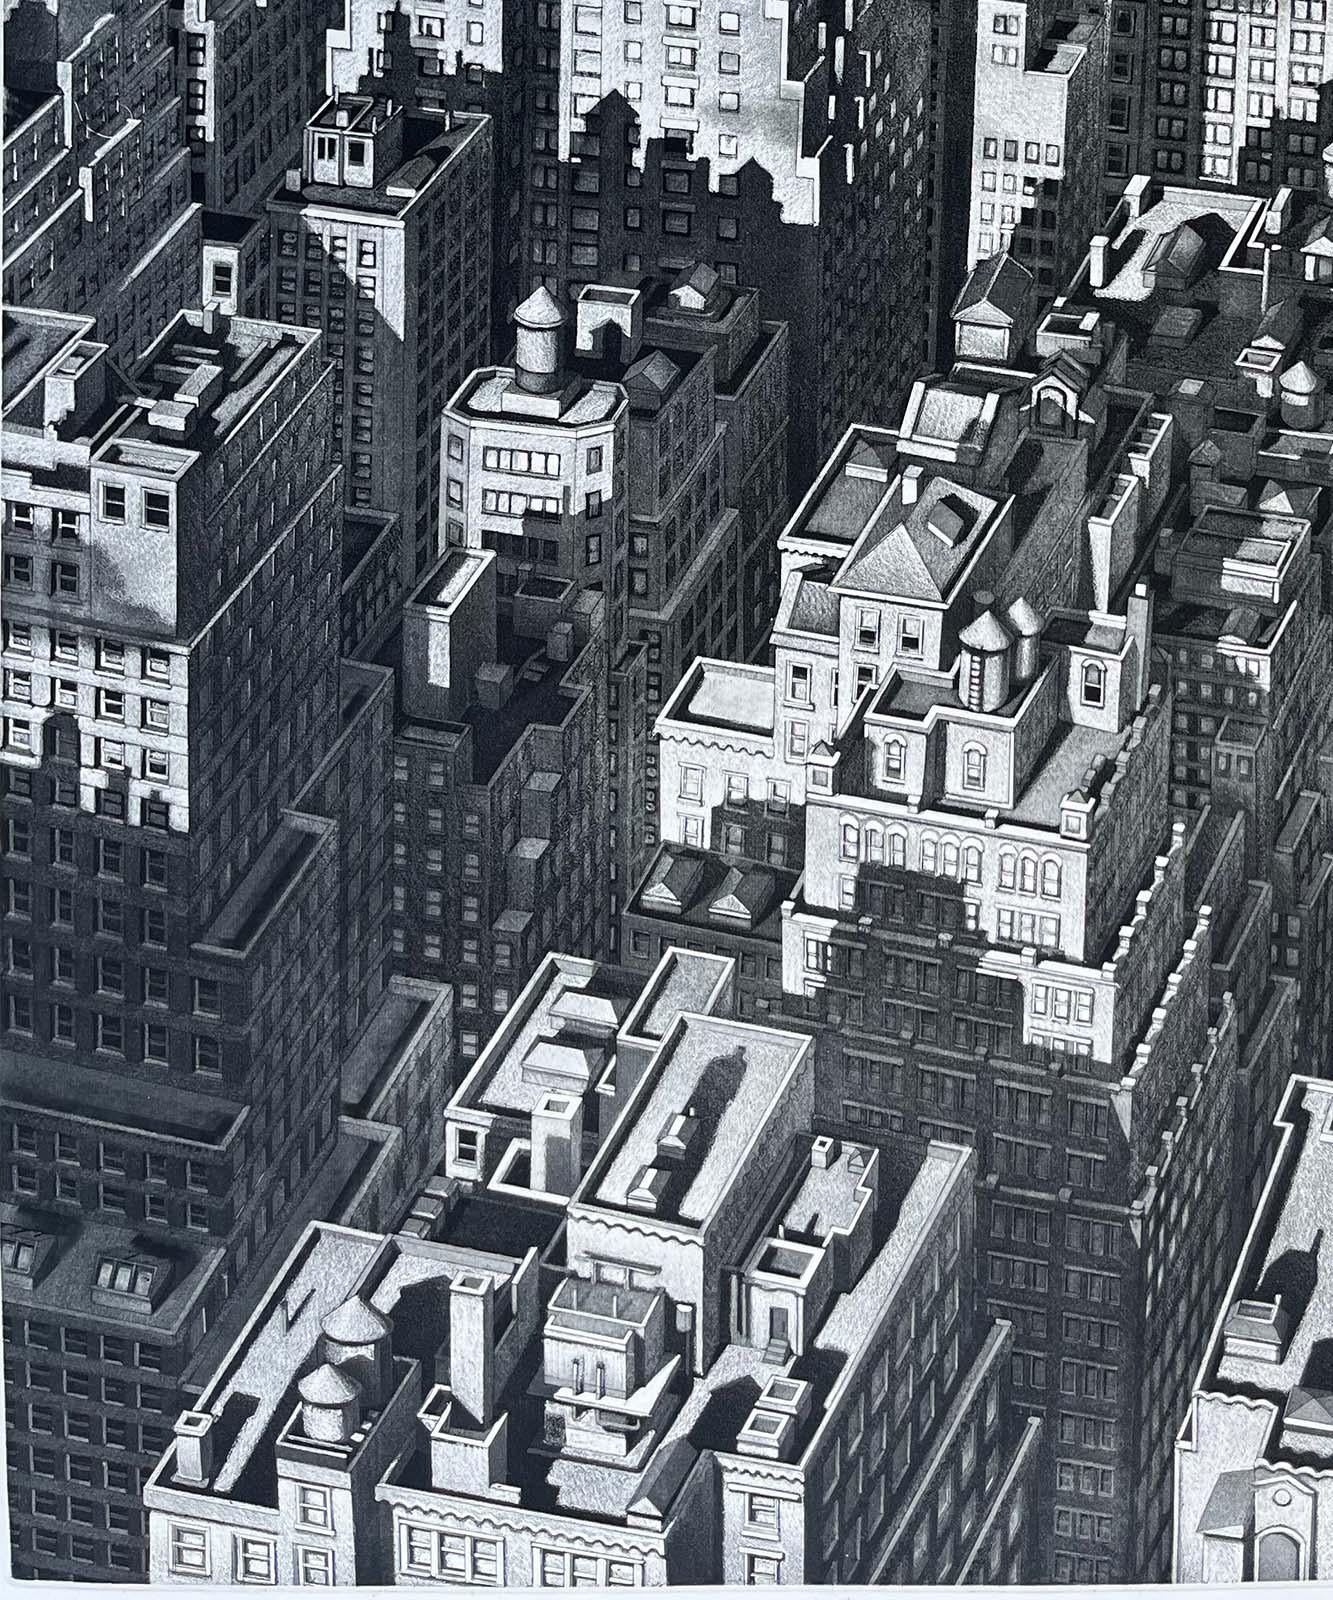 This impression is # 2 out of an edition of just 5 black and white impressions of this stunning aerial view of Manhattan. The shadow of a single airplane is almost hidden against the sunny panorama of soaring skyscrapers.

Art Werger was born in